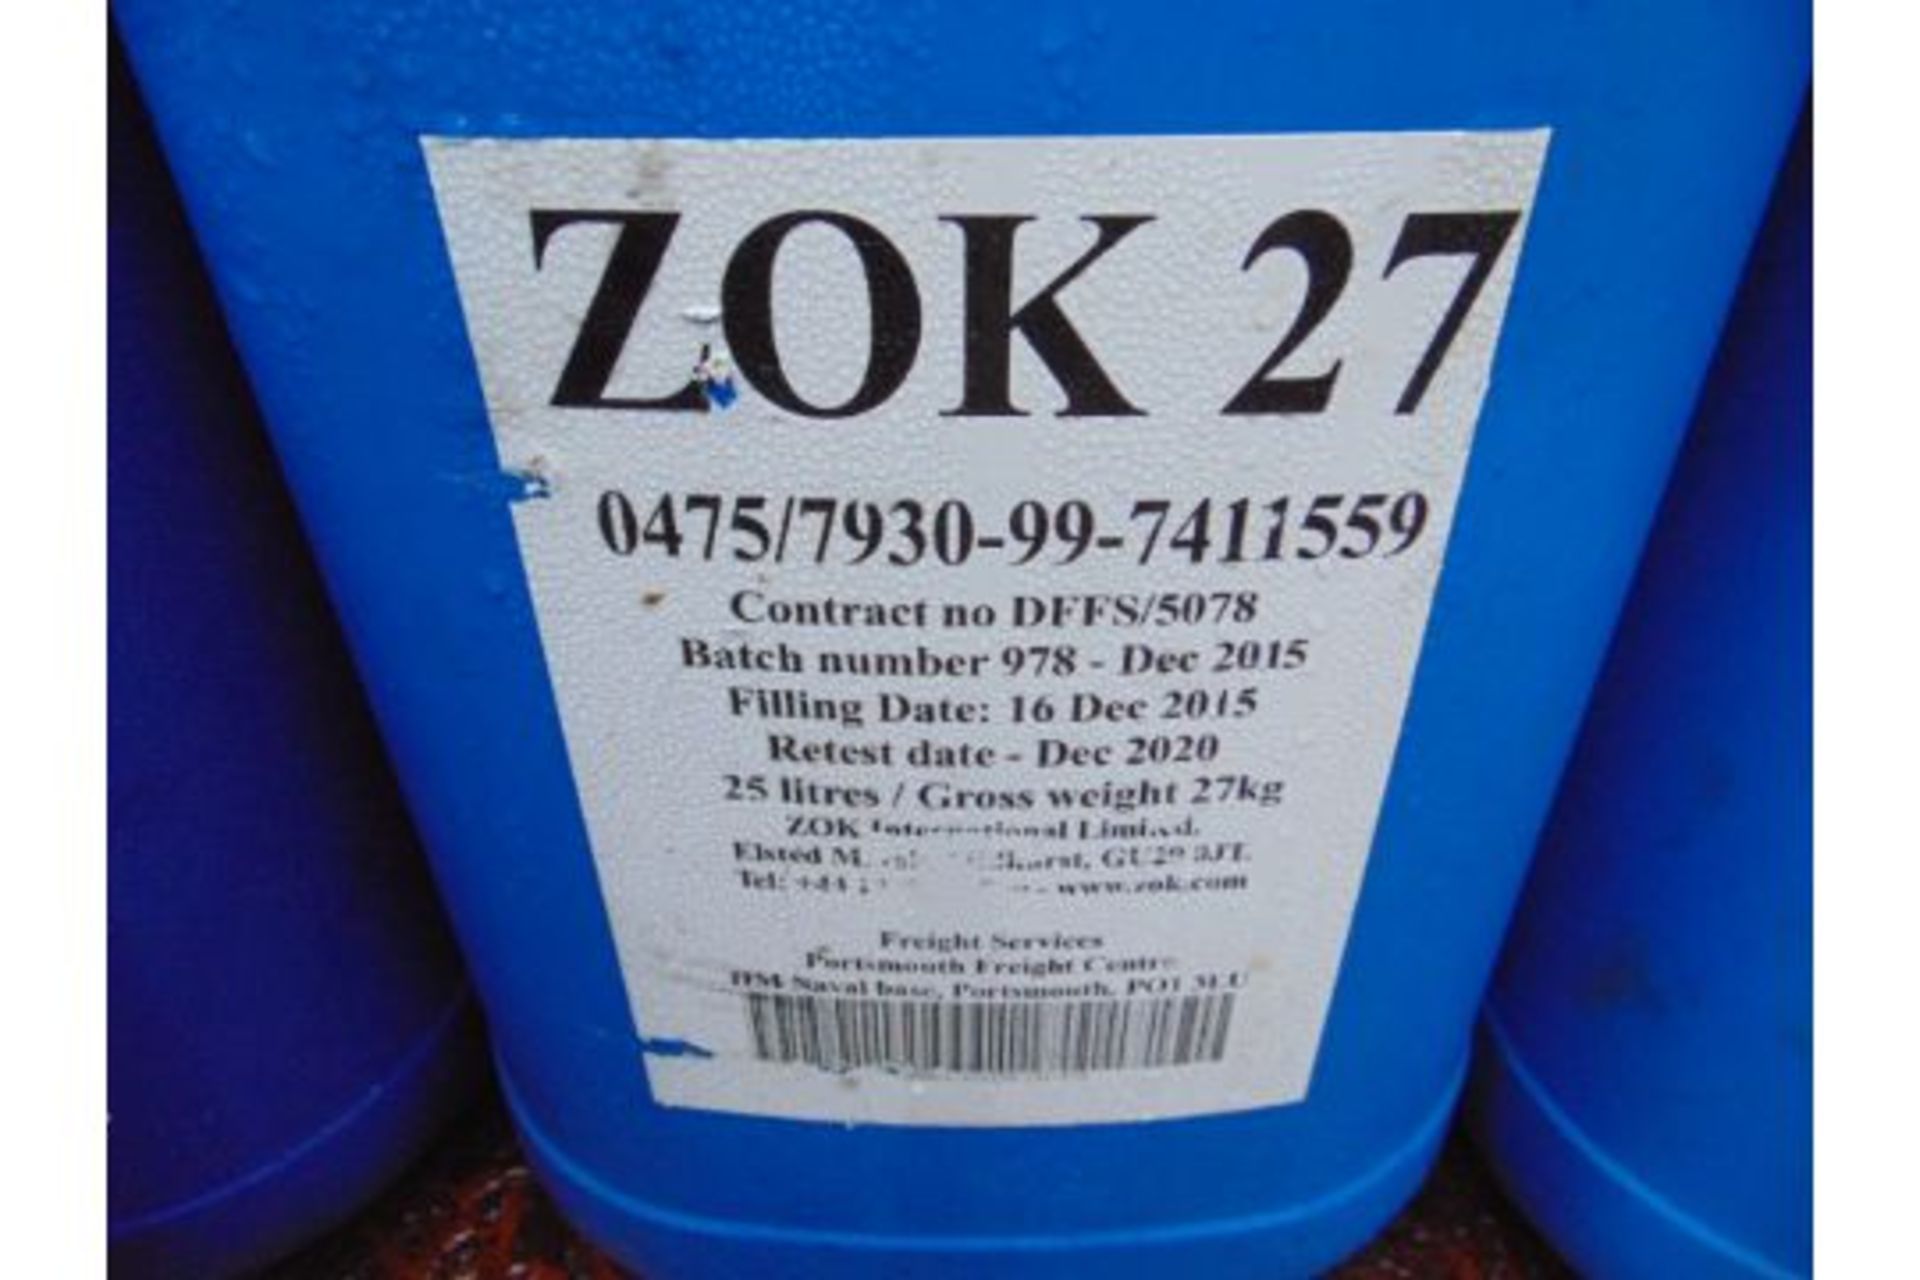 3 x Unissued 25L Drums of ZOK 27 Corrosion Inhibitor for Gas Turbines - Image 2 of 2